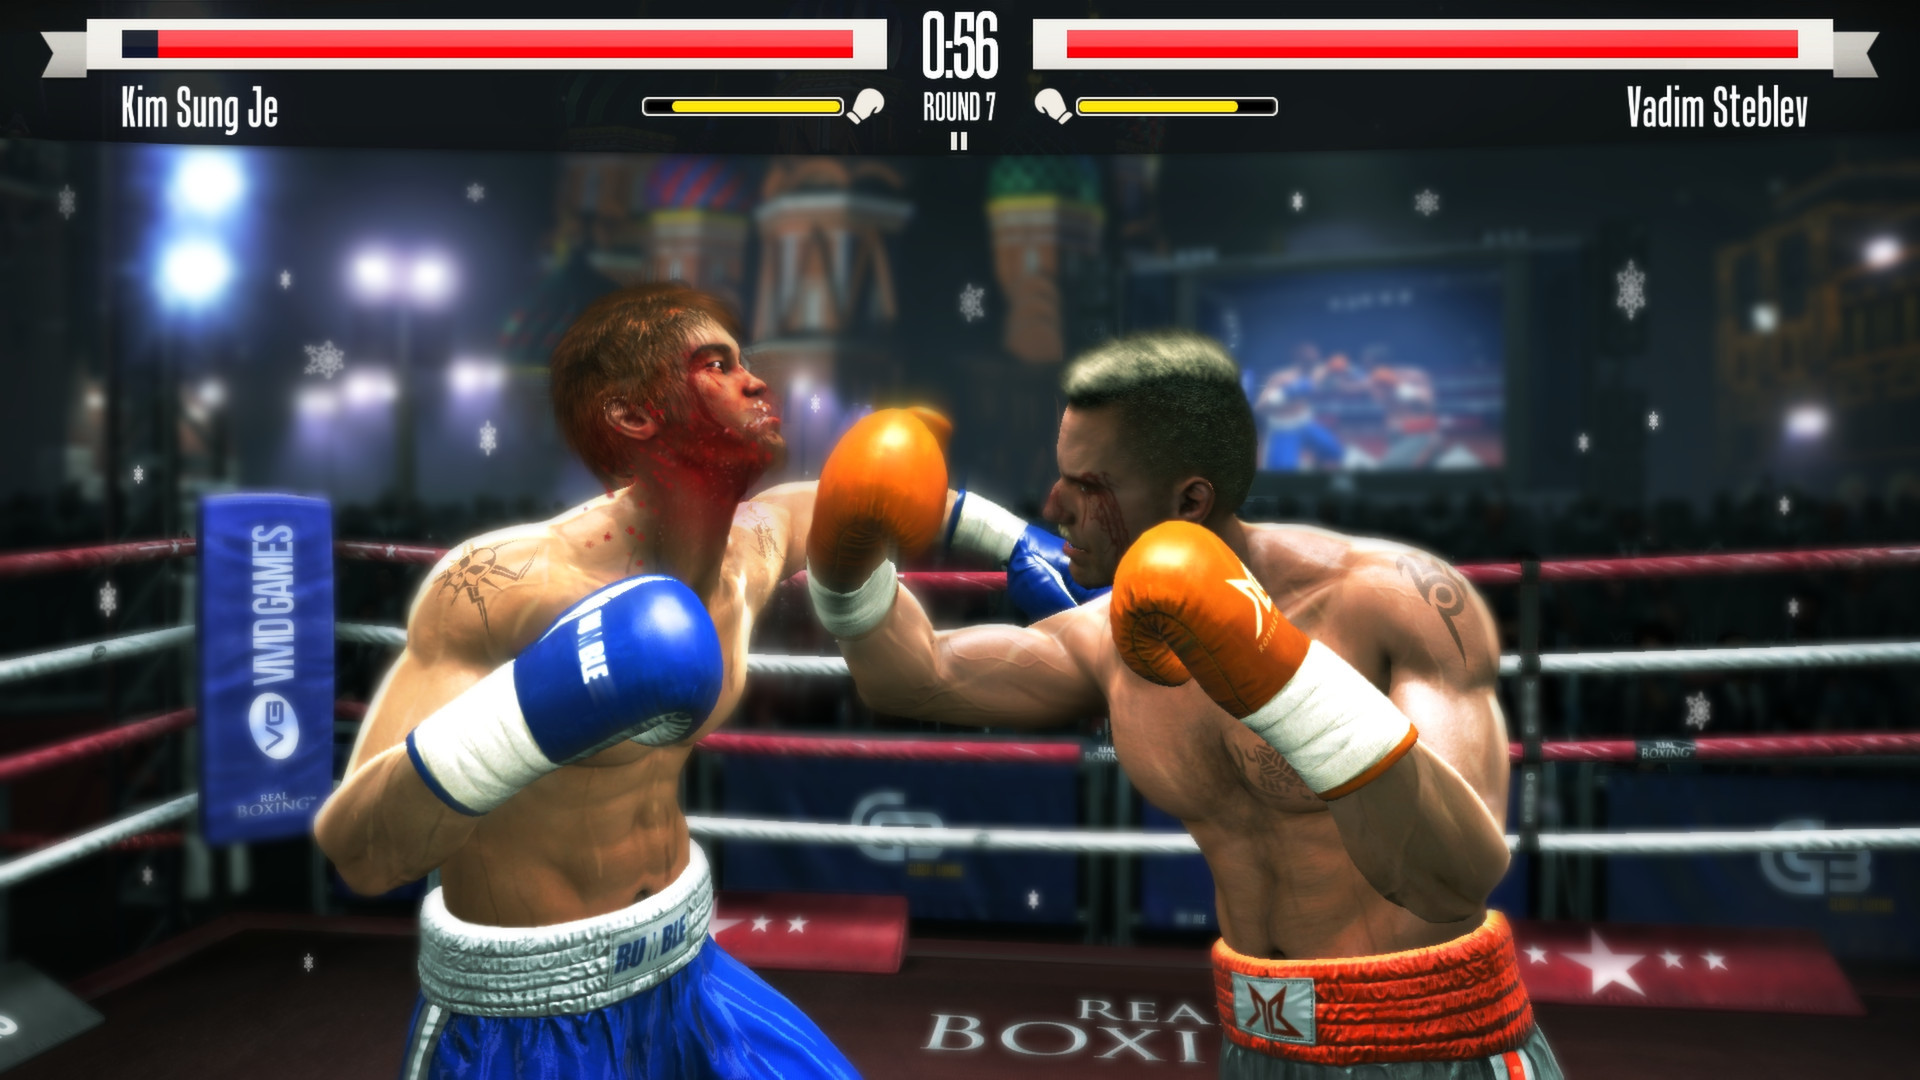 6 Best PC Boxing Games To Play In 2022 - Gameranx